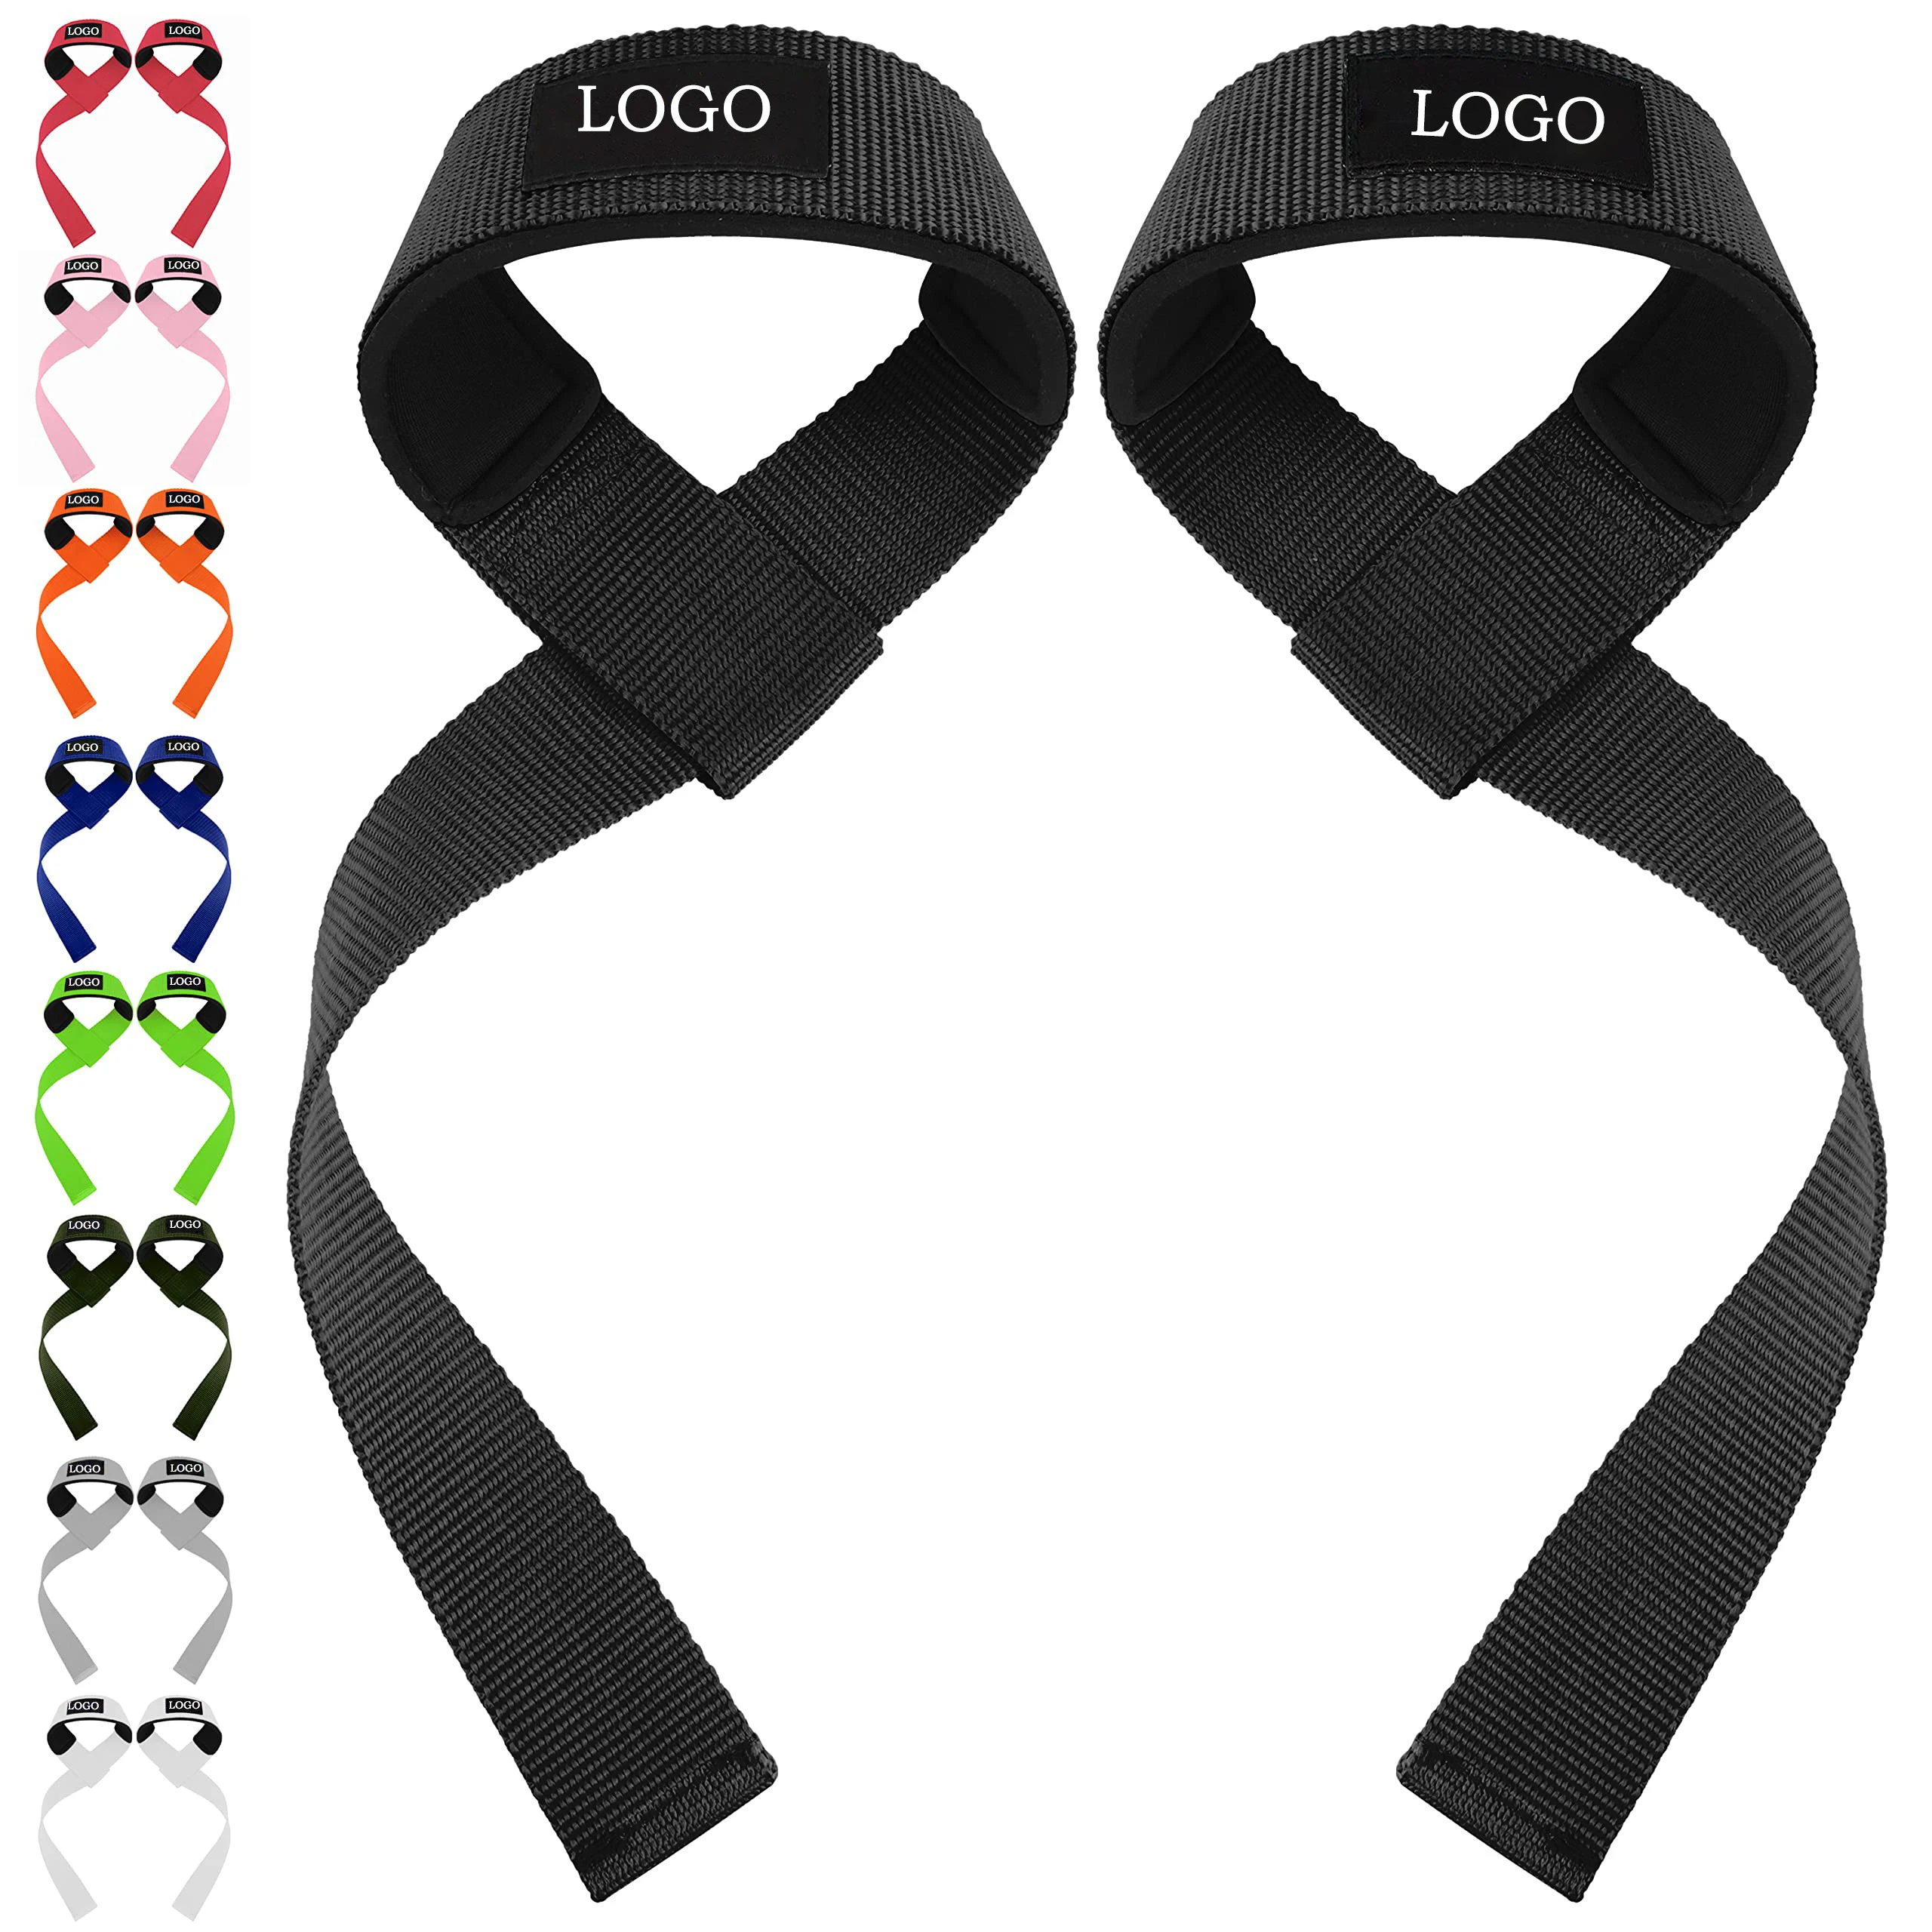 

Weightlifting Wrist Straps Strength Training Adjustable Non-slip Gym Fitness Lifting Strap Wrist Support Sports Grip Band